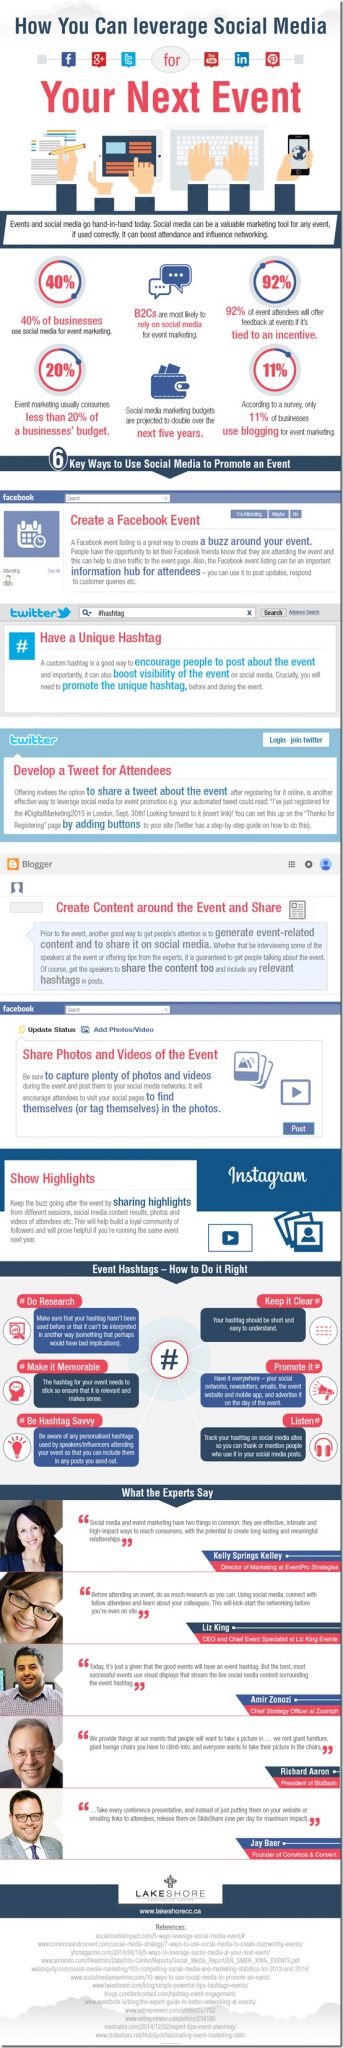 How You Can leverage Social Media for Your Next Event